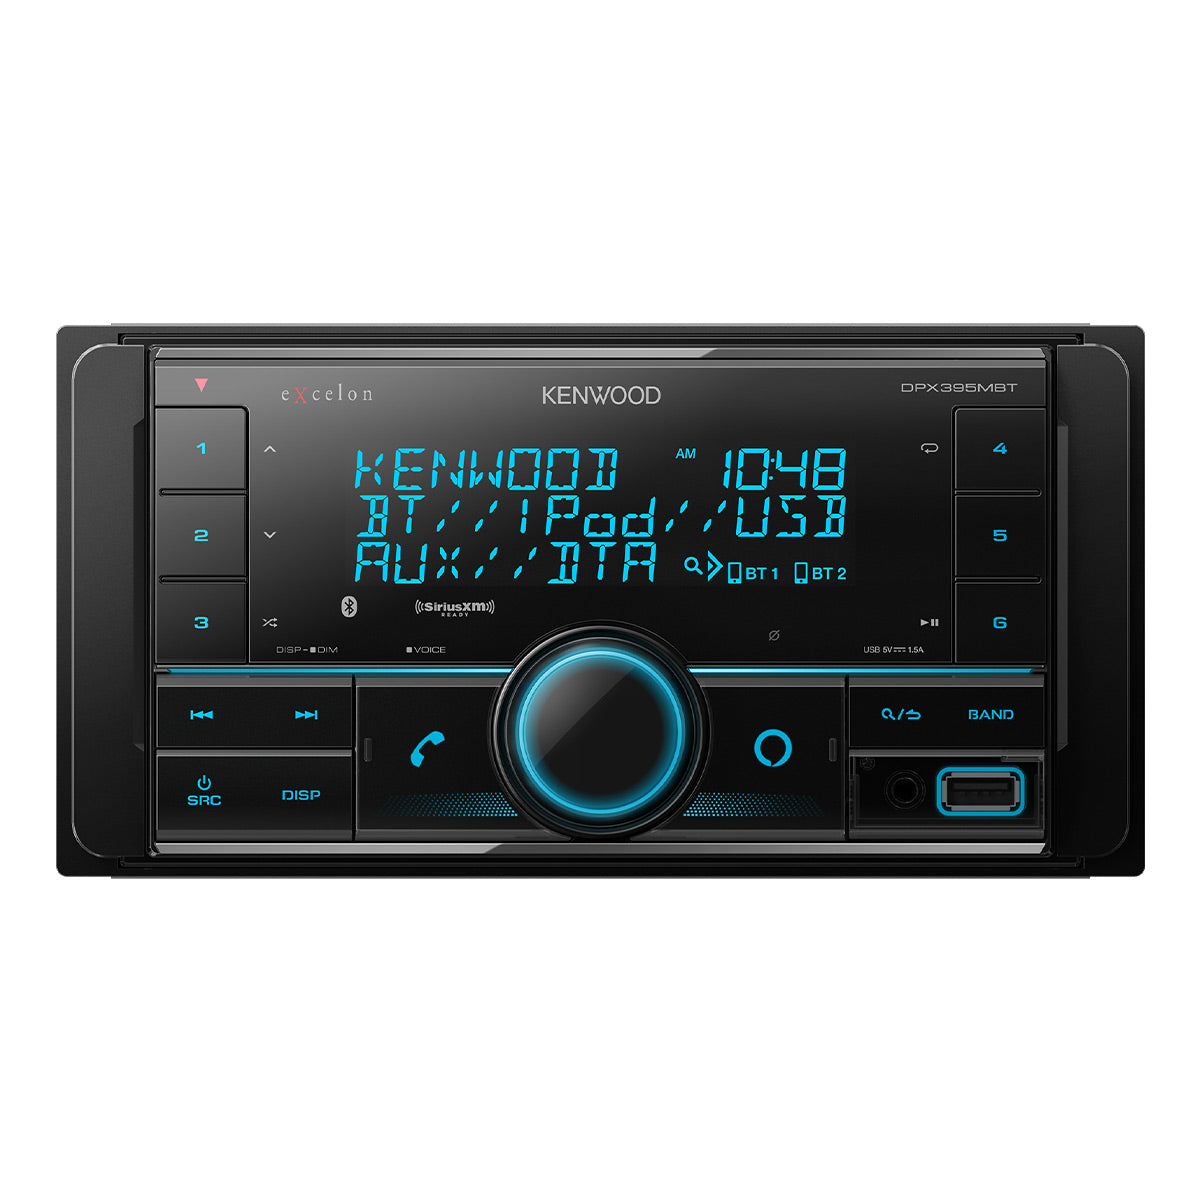 Kenwood DPX395MBT eXcelon Digital Media Receiver with Bluetooth and Amazon Alexa Built-In